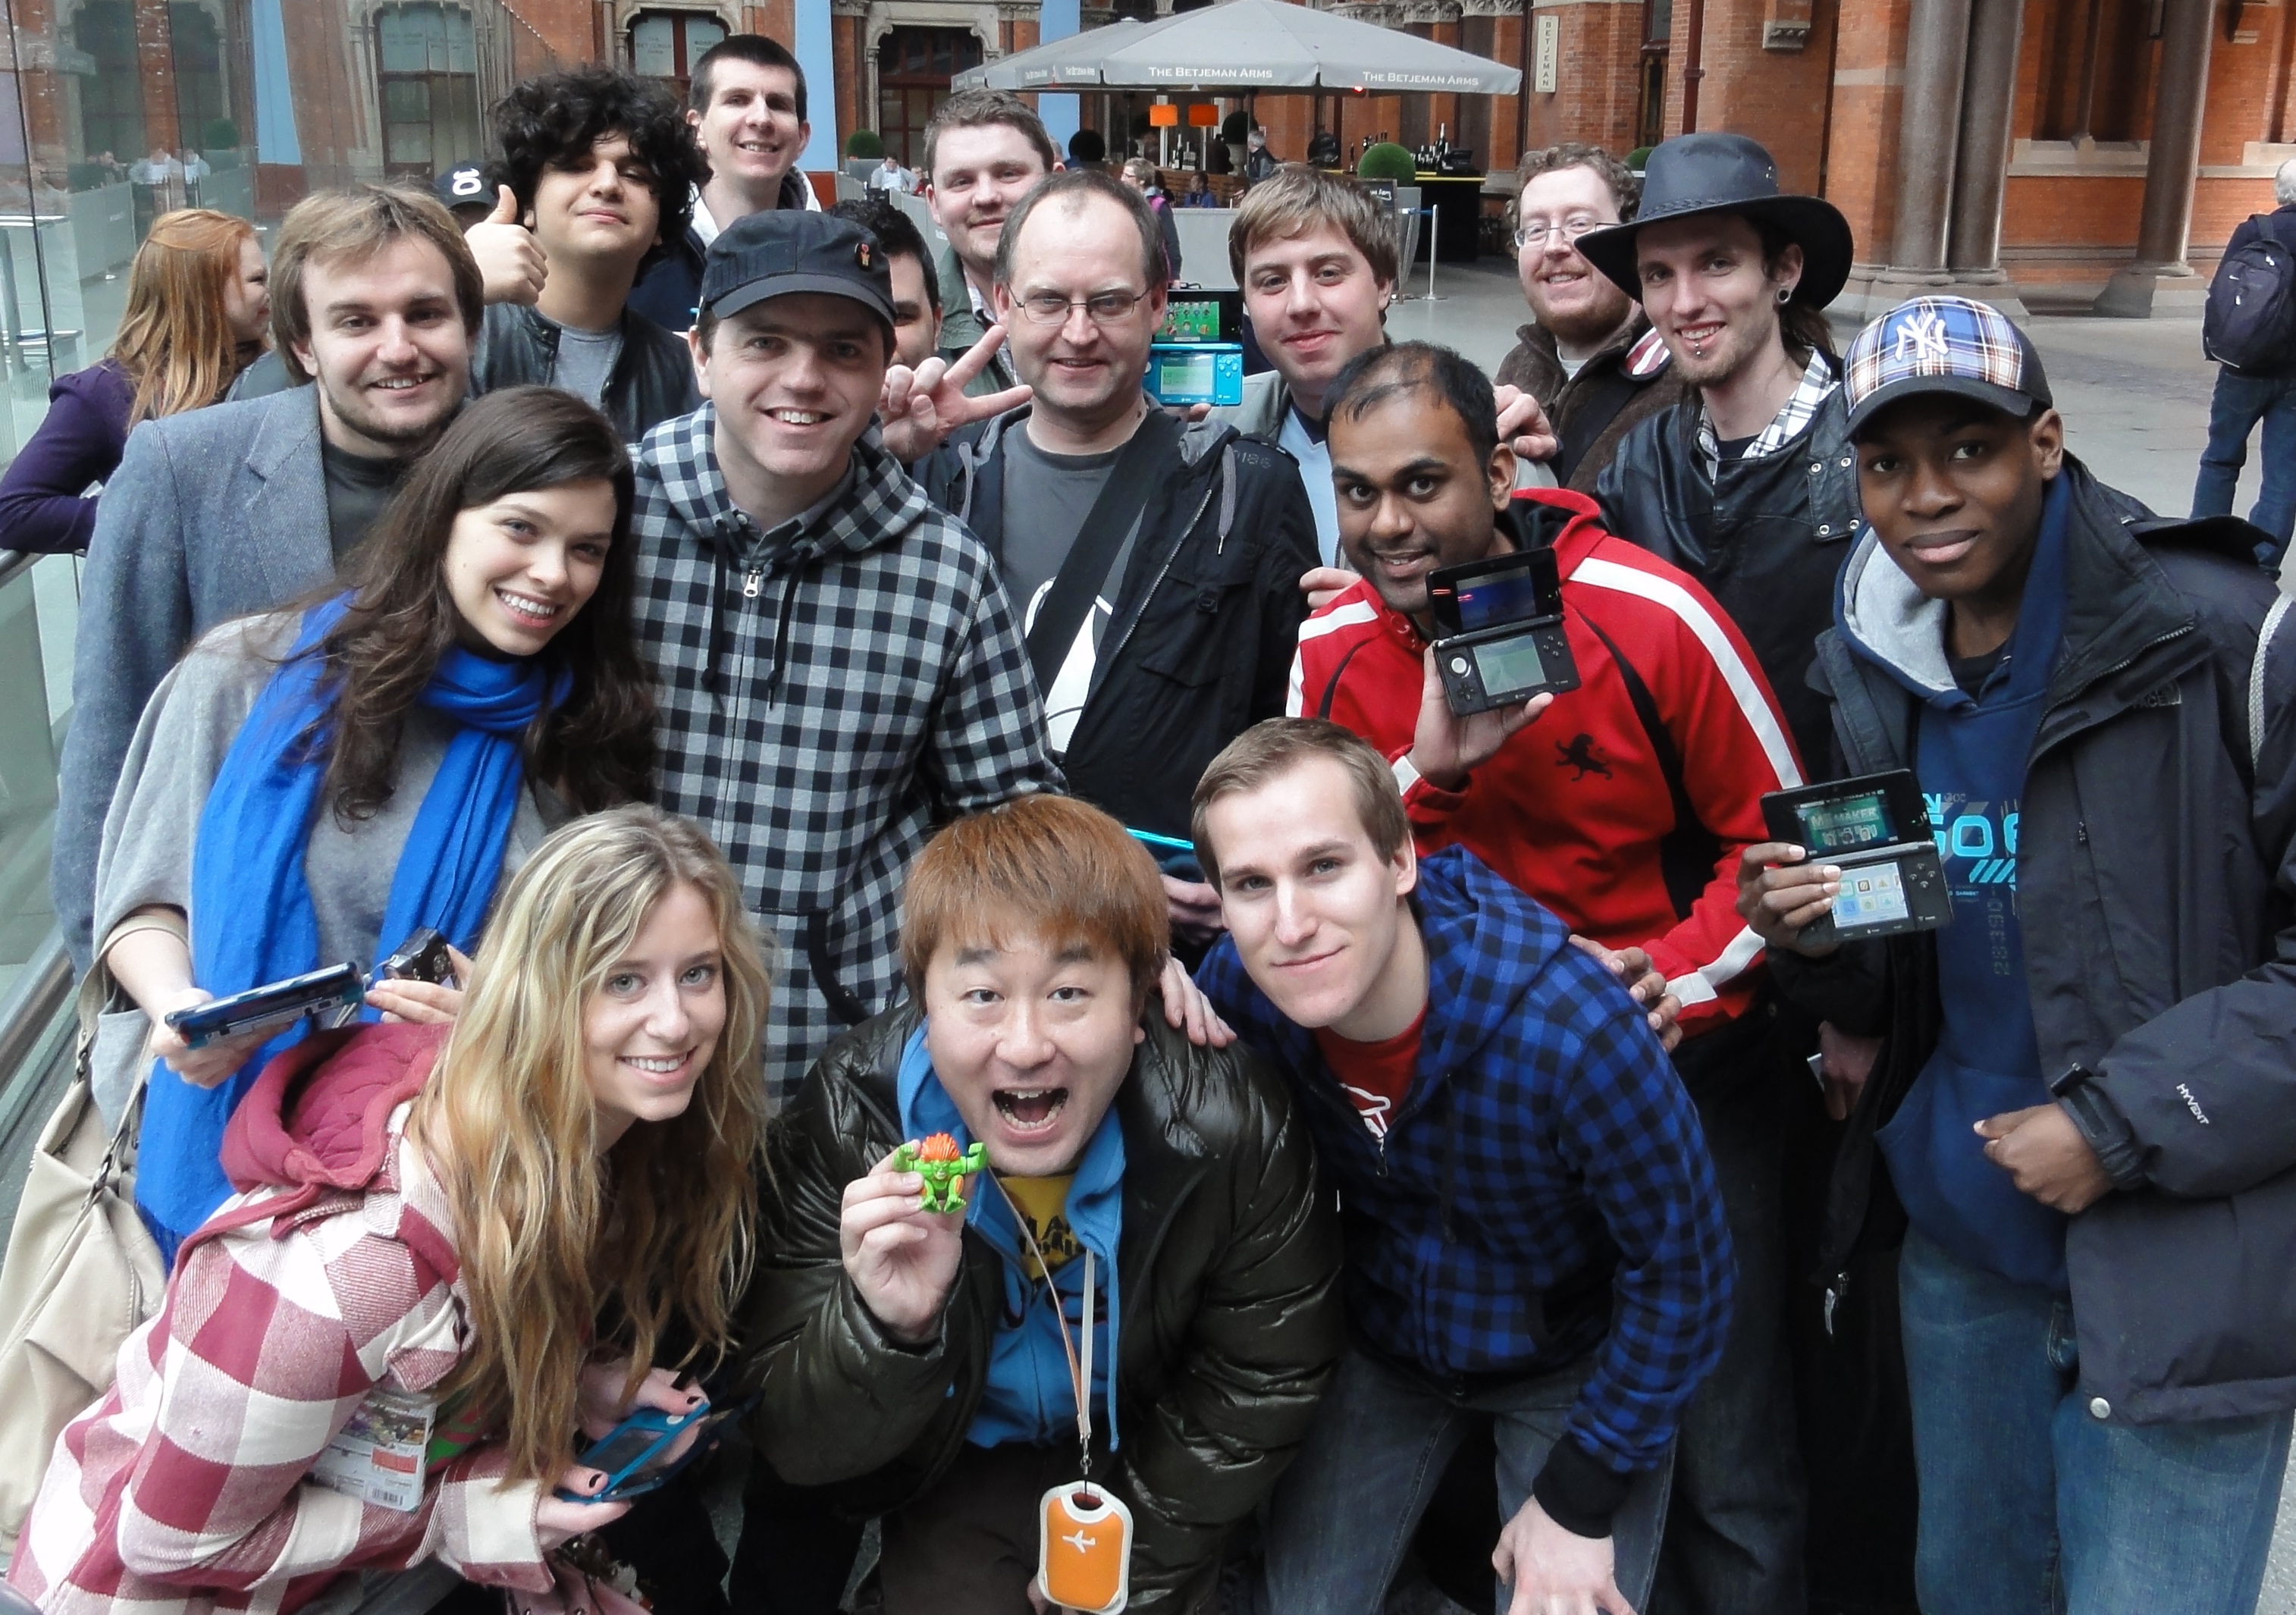 yoshinori-ono-at-the-london-3ds-streetpass-event-in-st-pancras-station-27-03-11-from-12pm.jpg